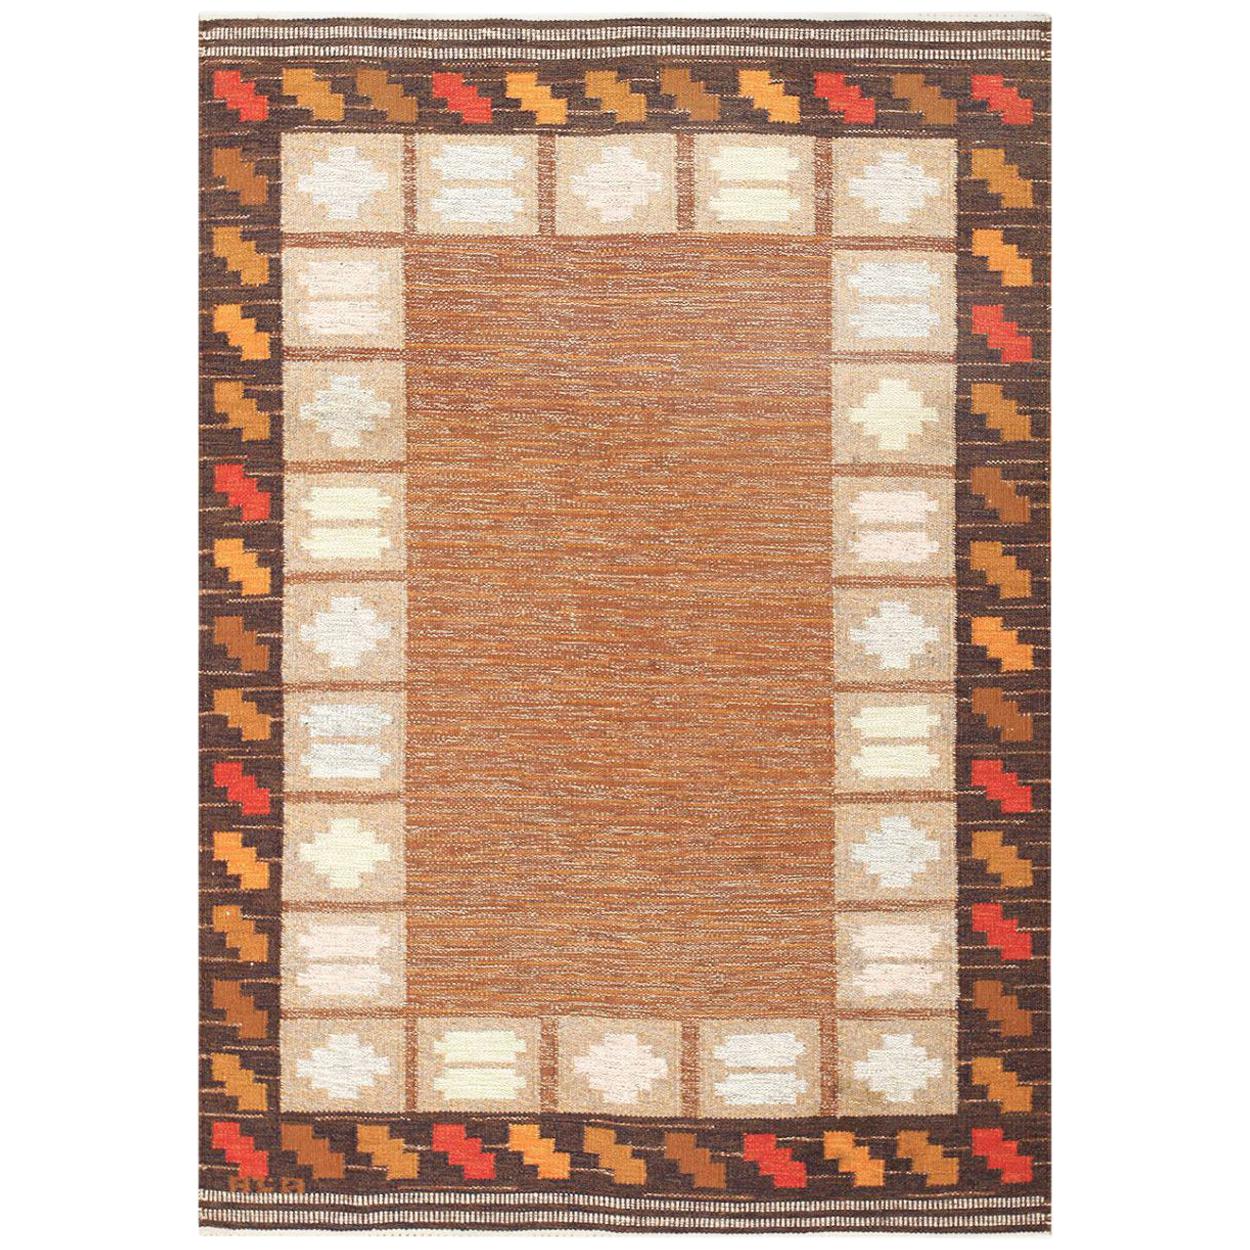 Vintage Swedish Kilim by Ana Joanna Angstrom. Size: 4 ft 8 in x 6 ft 7 in 